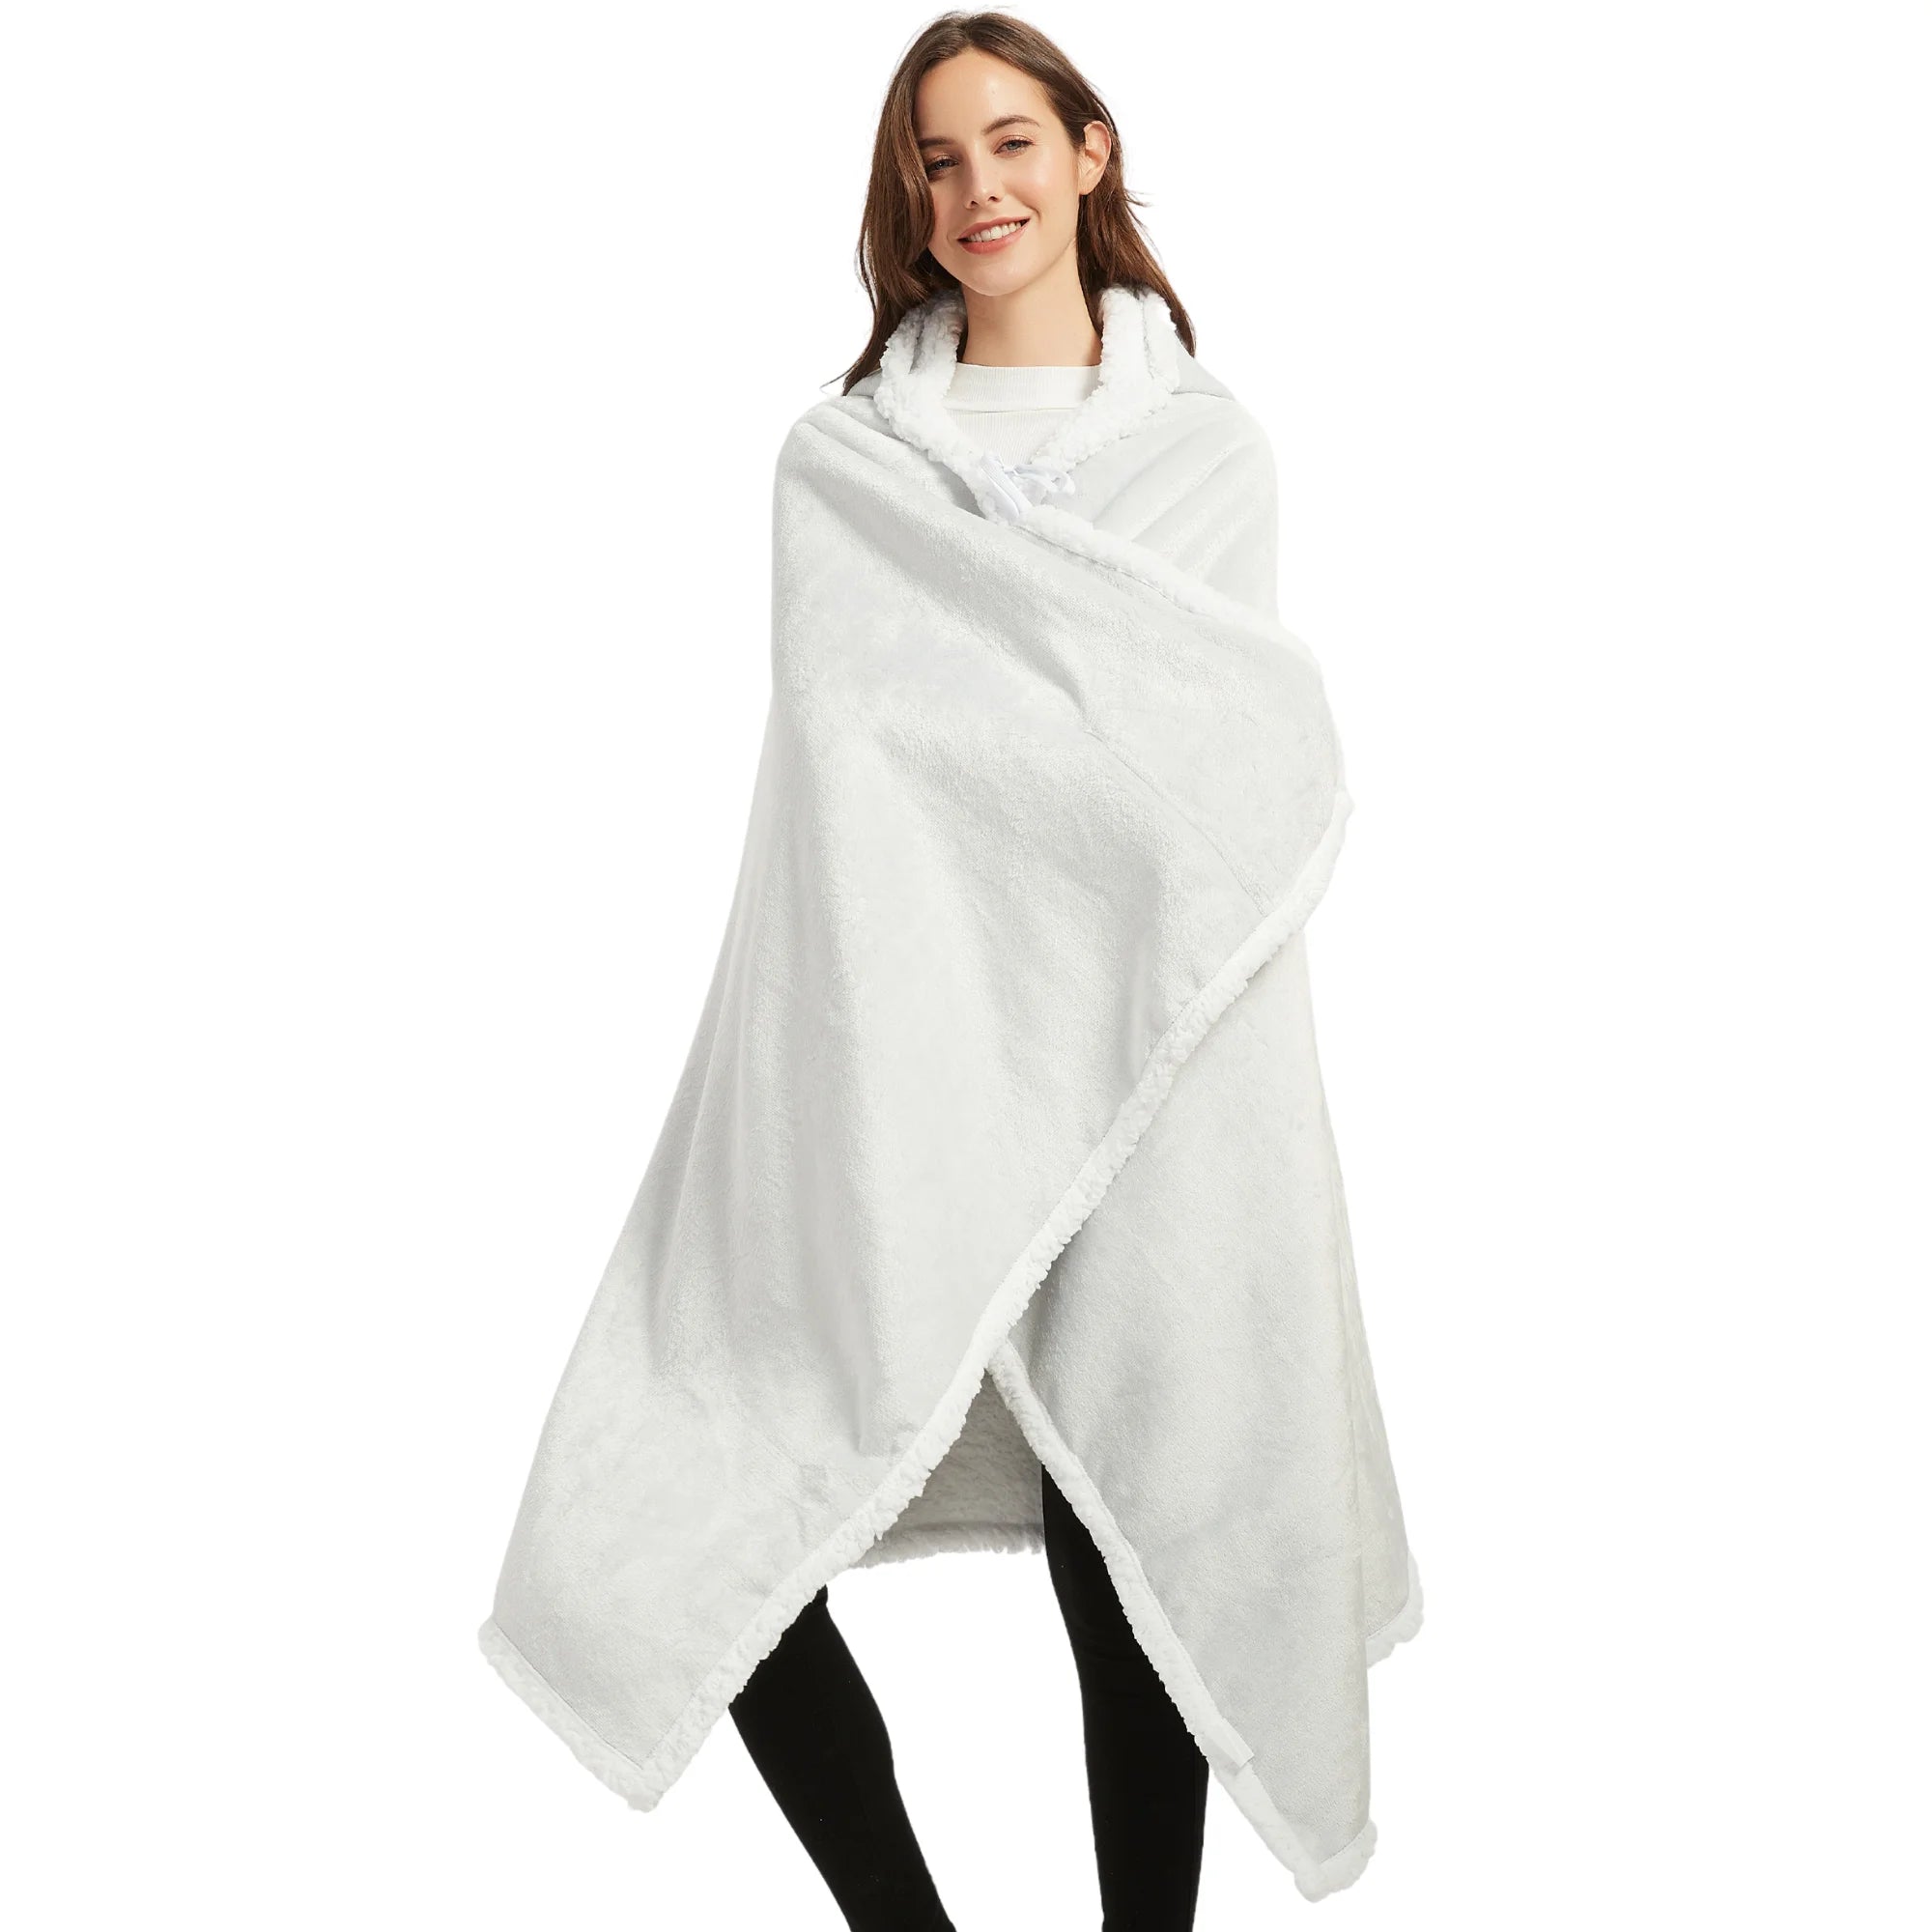 poncho plaid blanc argent The Oversized Hoodie